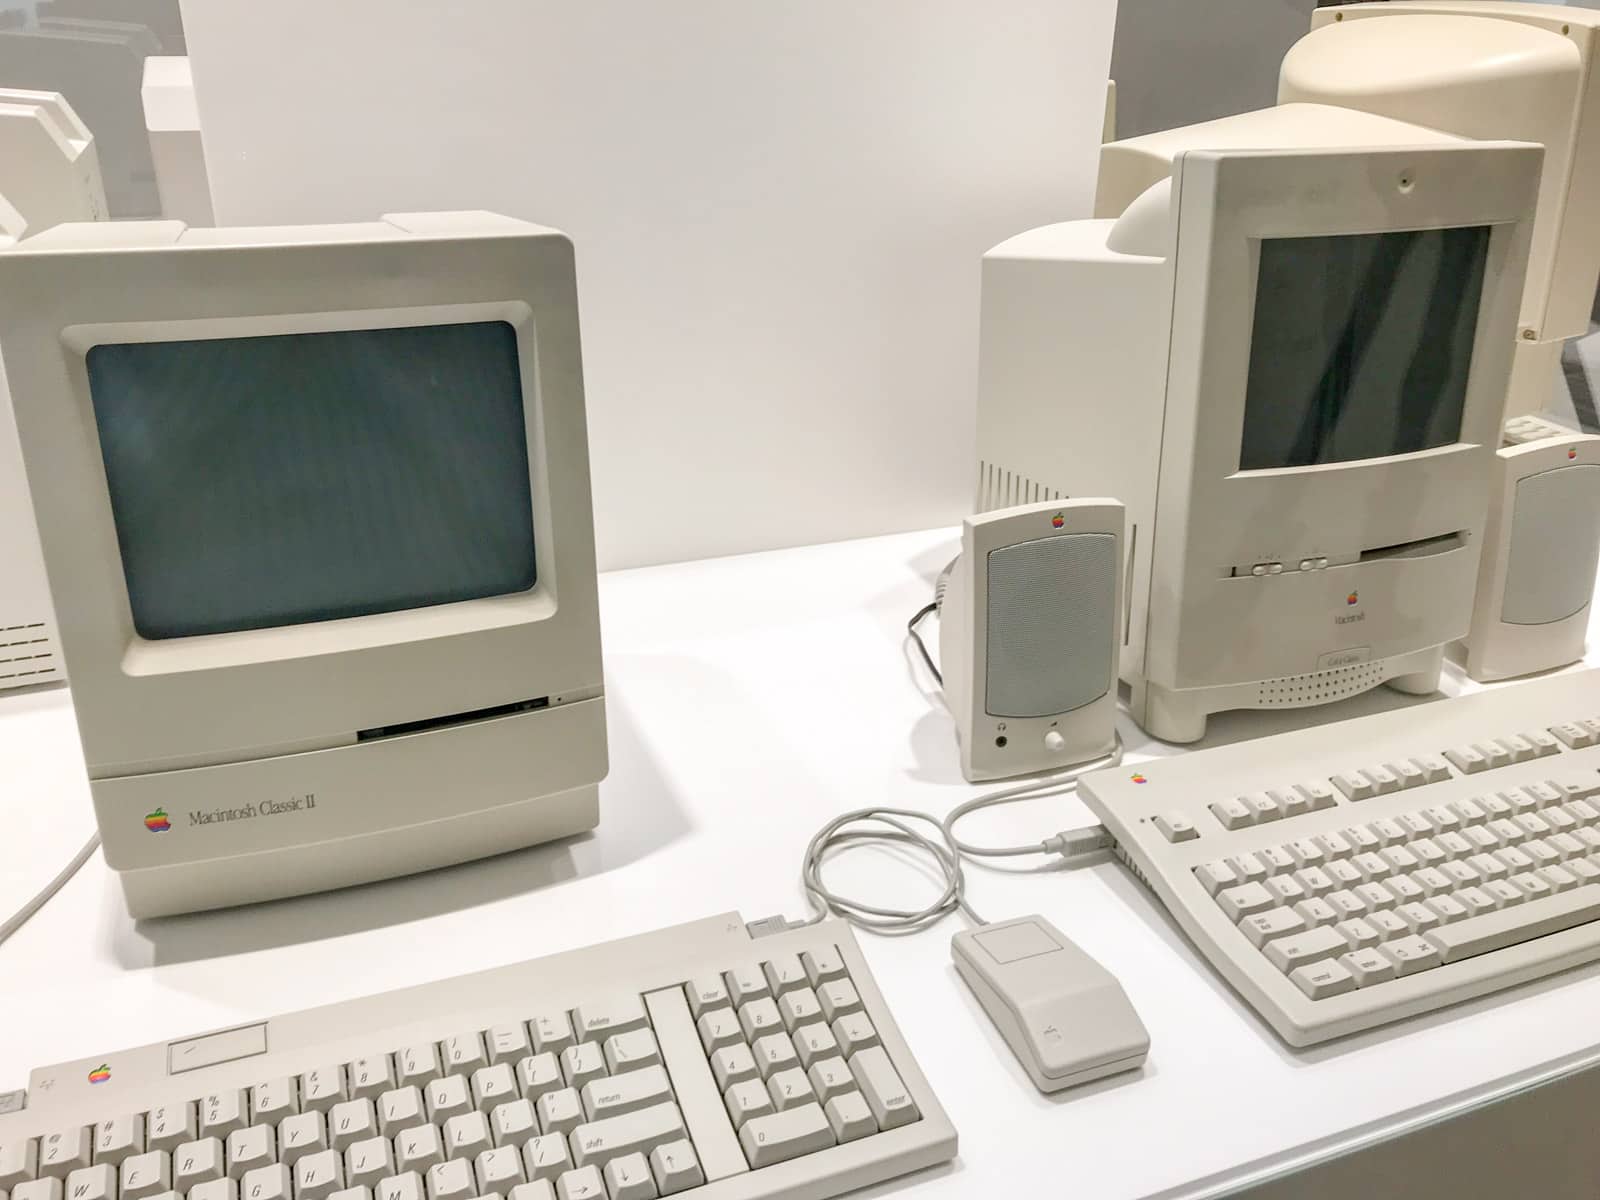 Two computer displays side by side, with keyboards in front of them. The hardware is light stone grey and the displays have very wide bezels